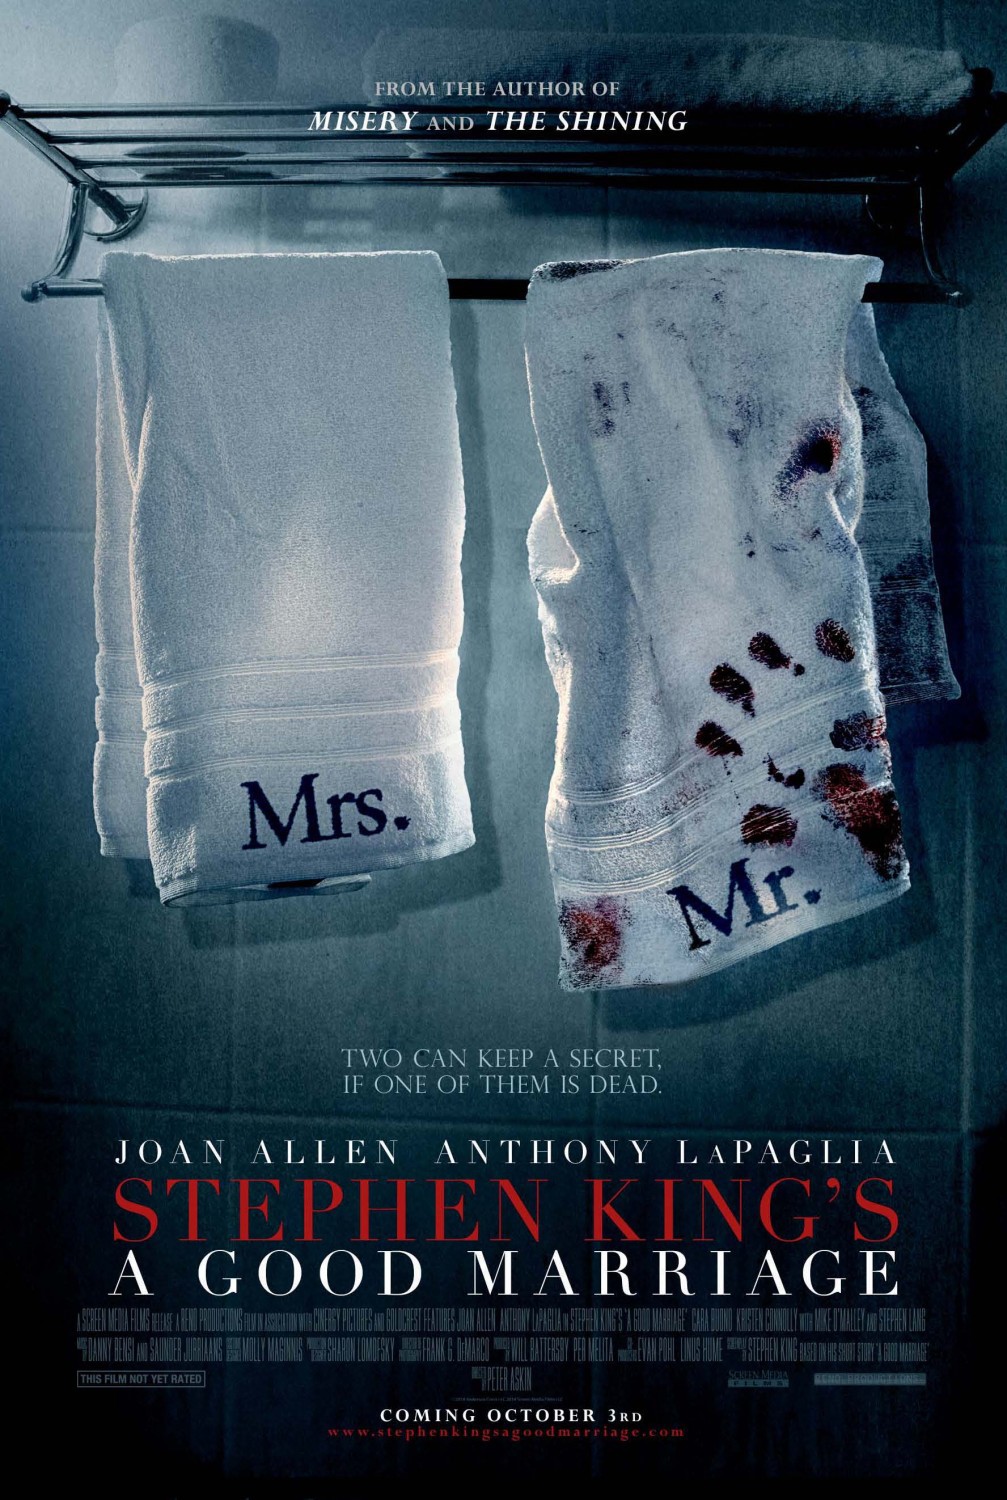 A Good Marriage 2014 HDRip XviD AC3 EVO Obfuscated